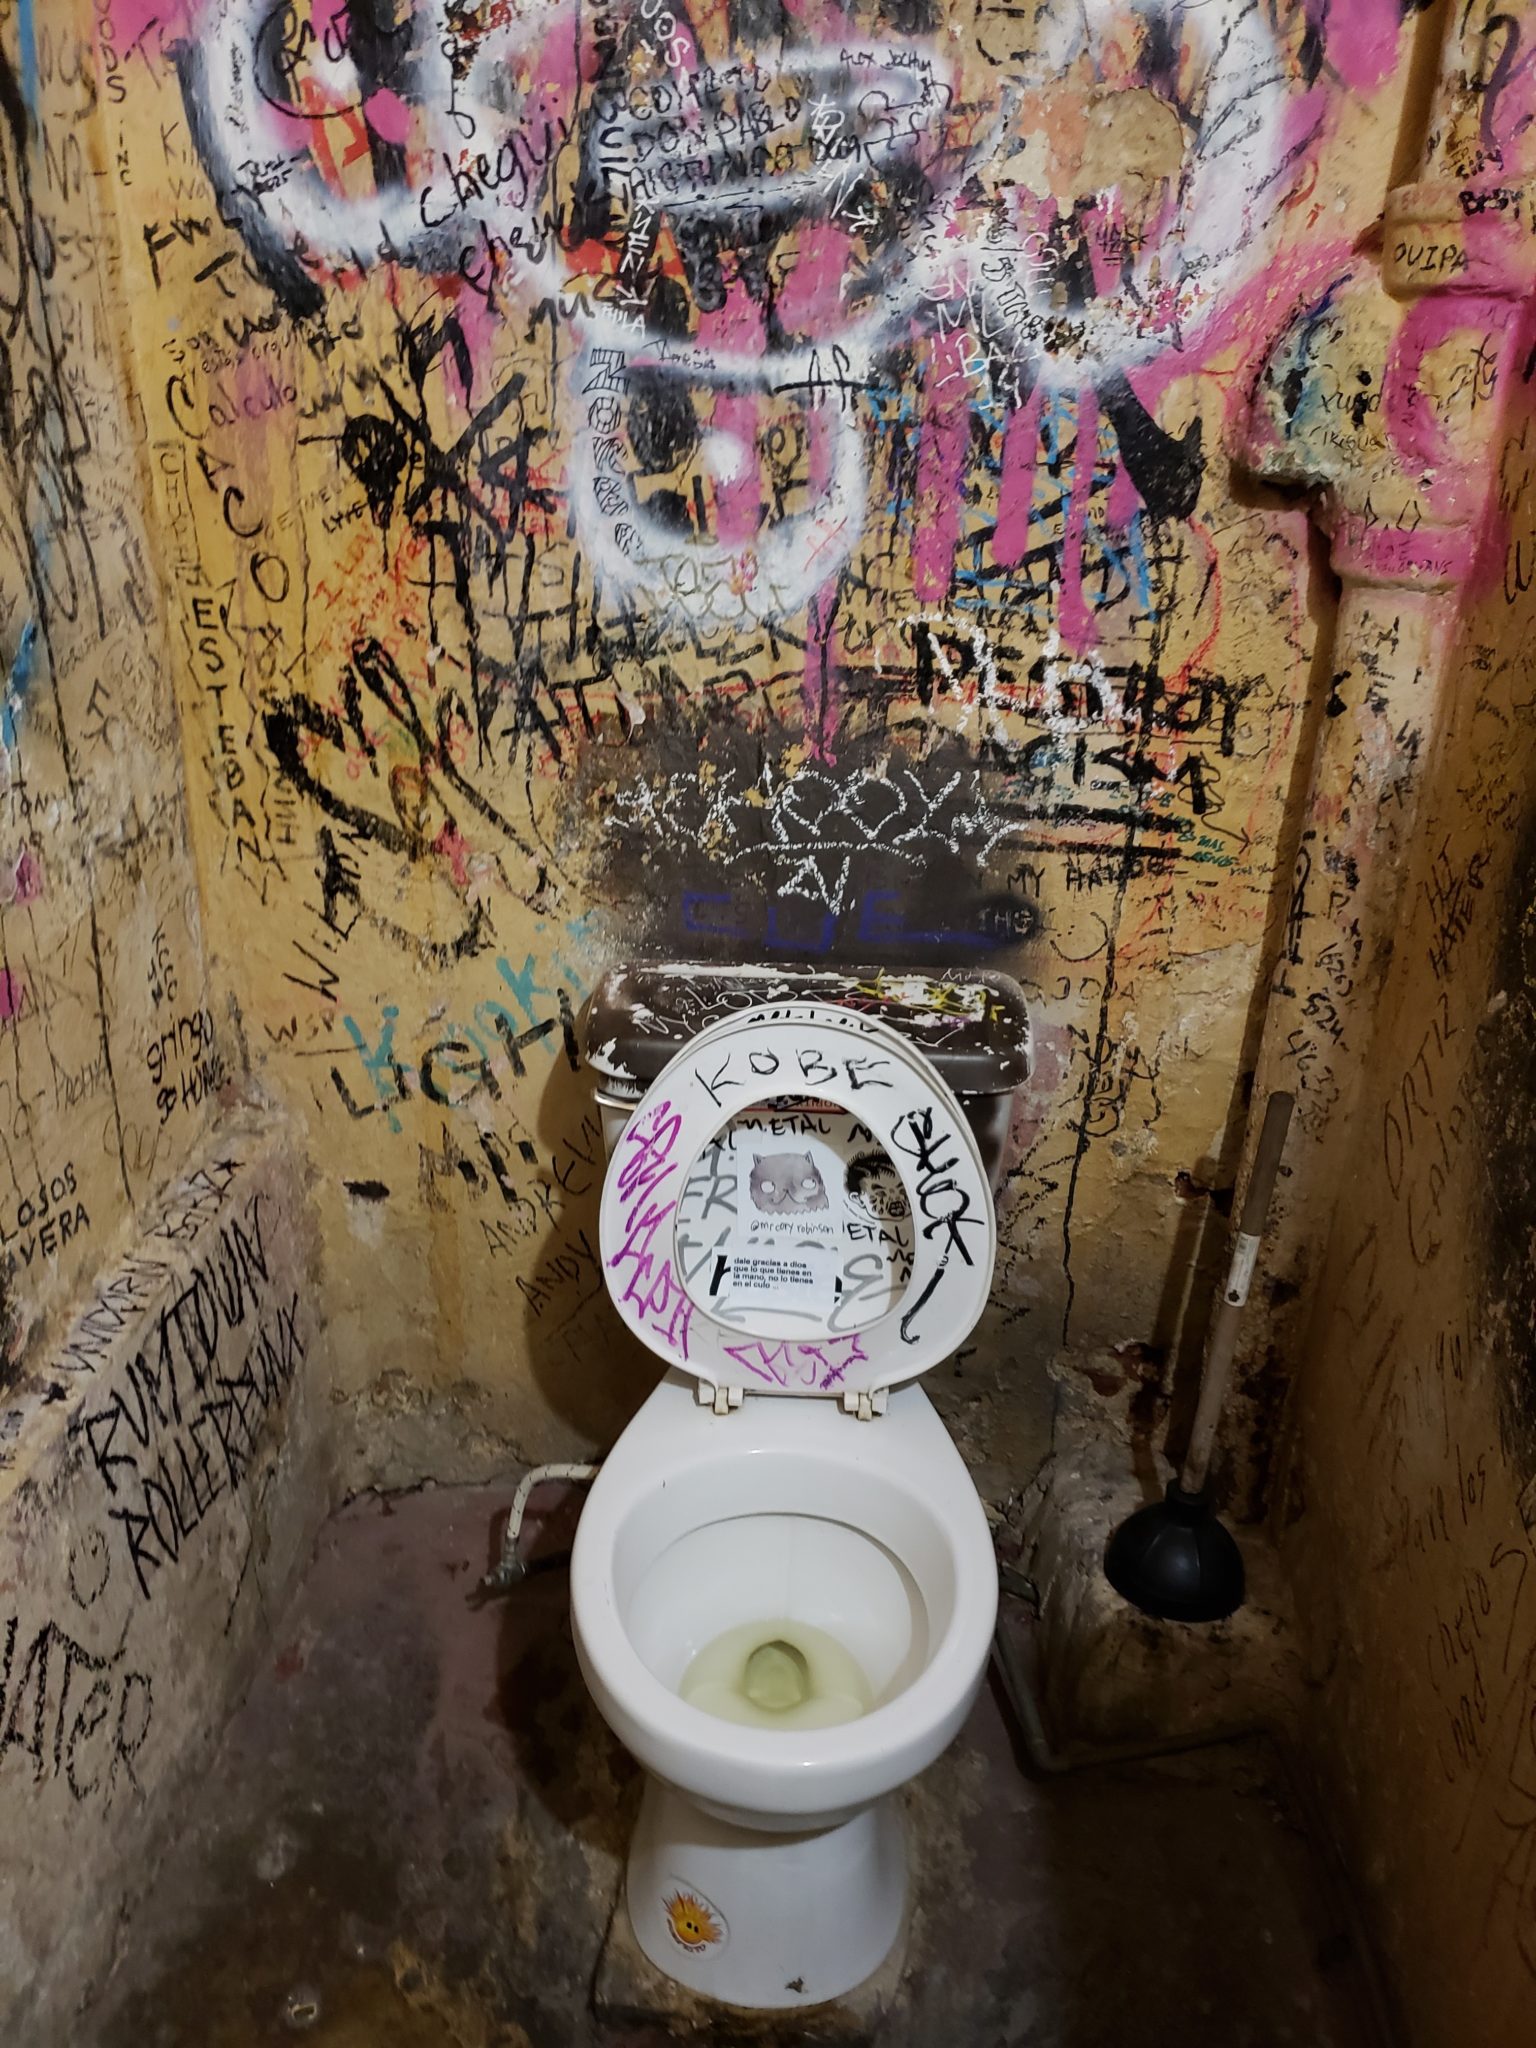 a toilet with graffiti on the wall